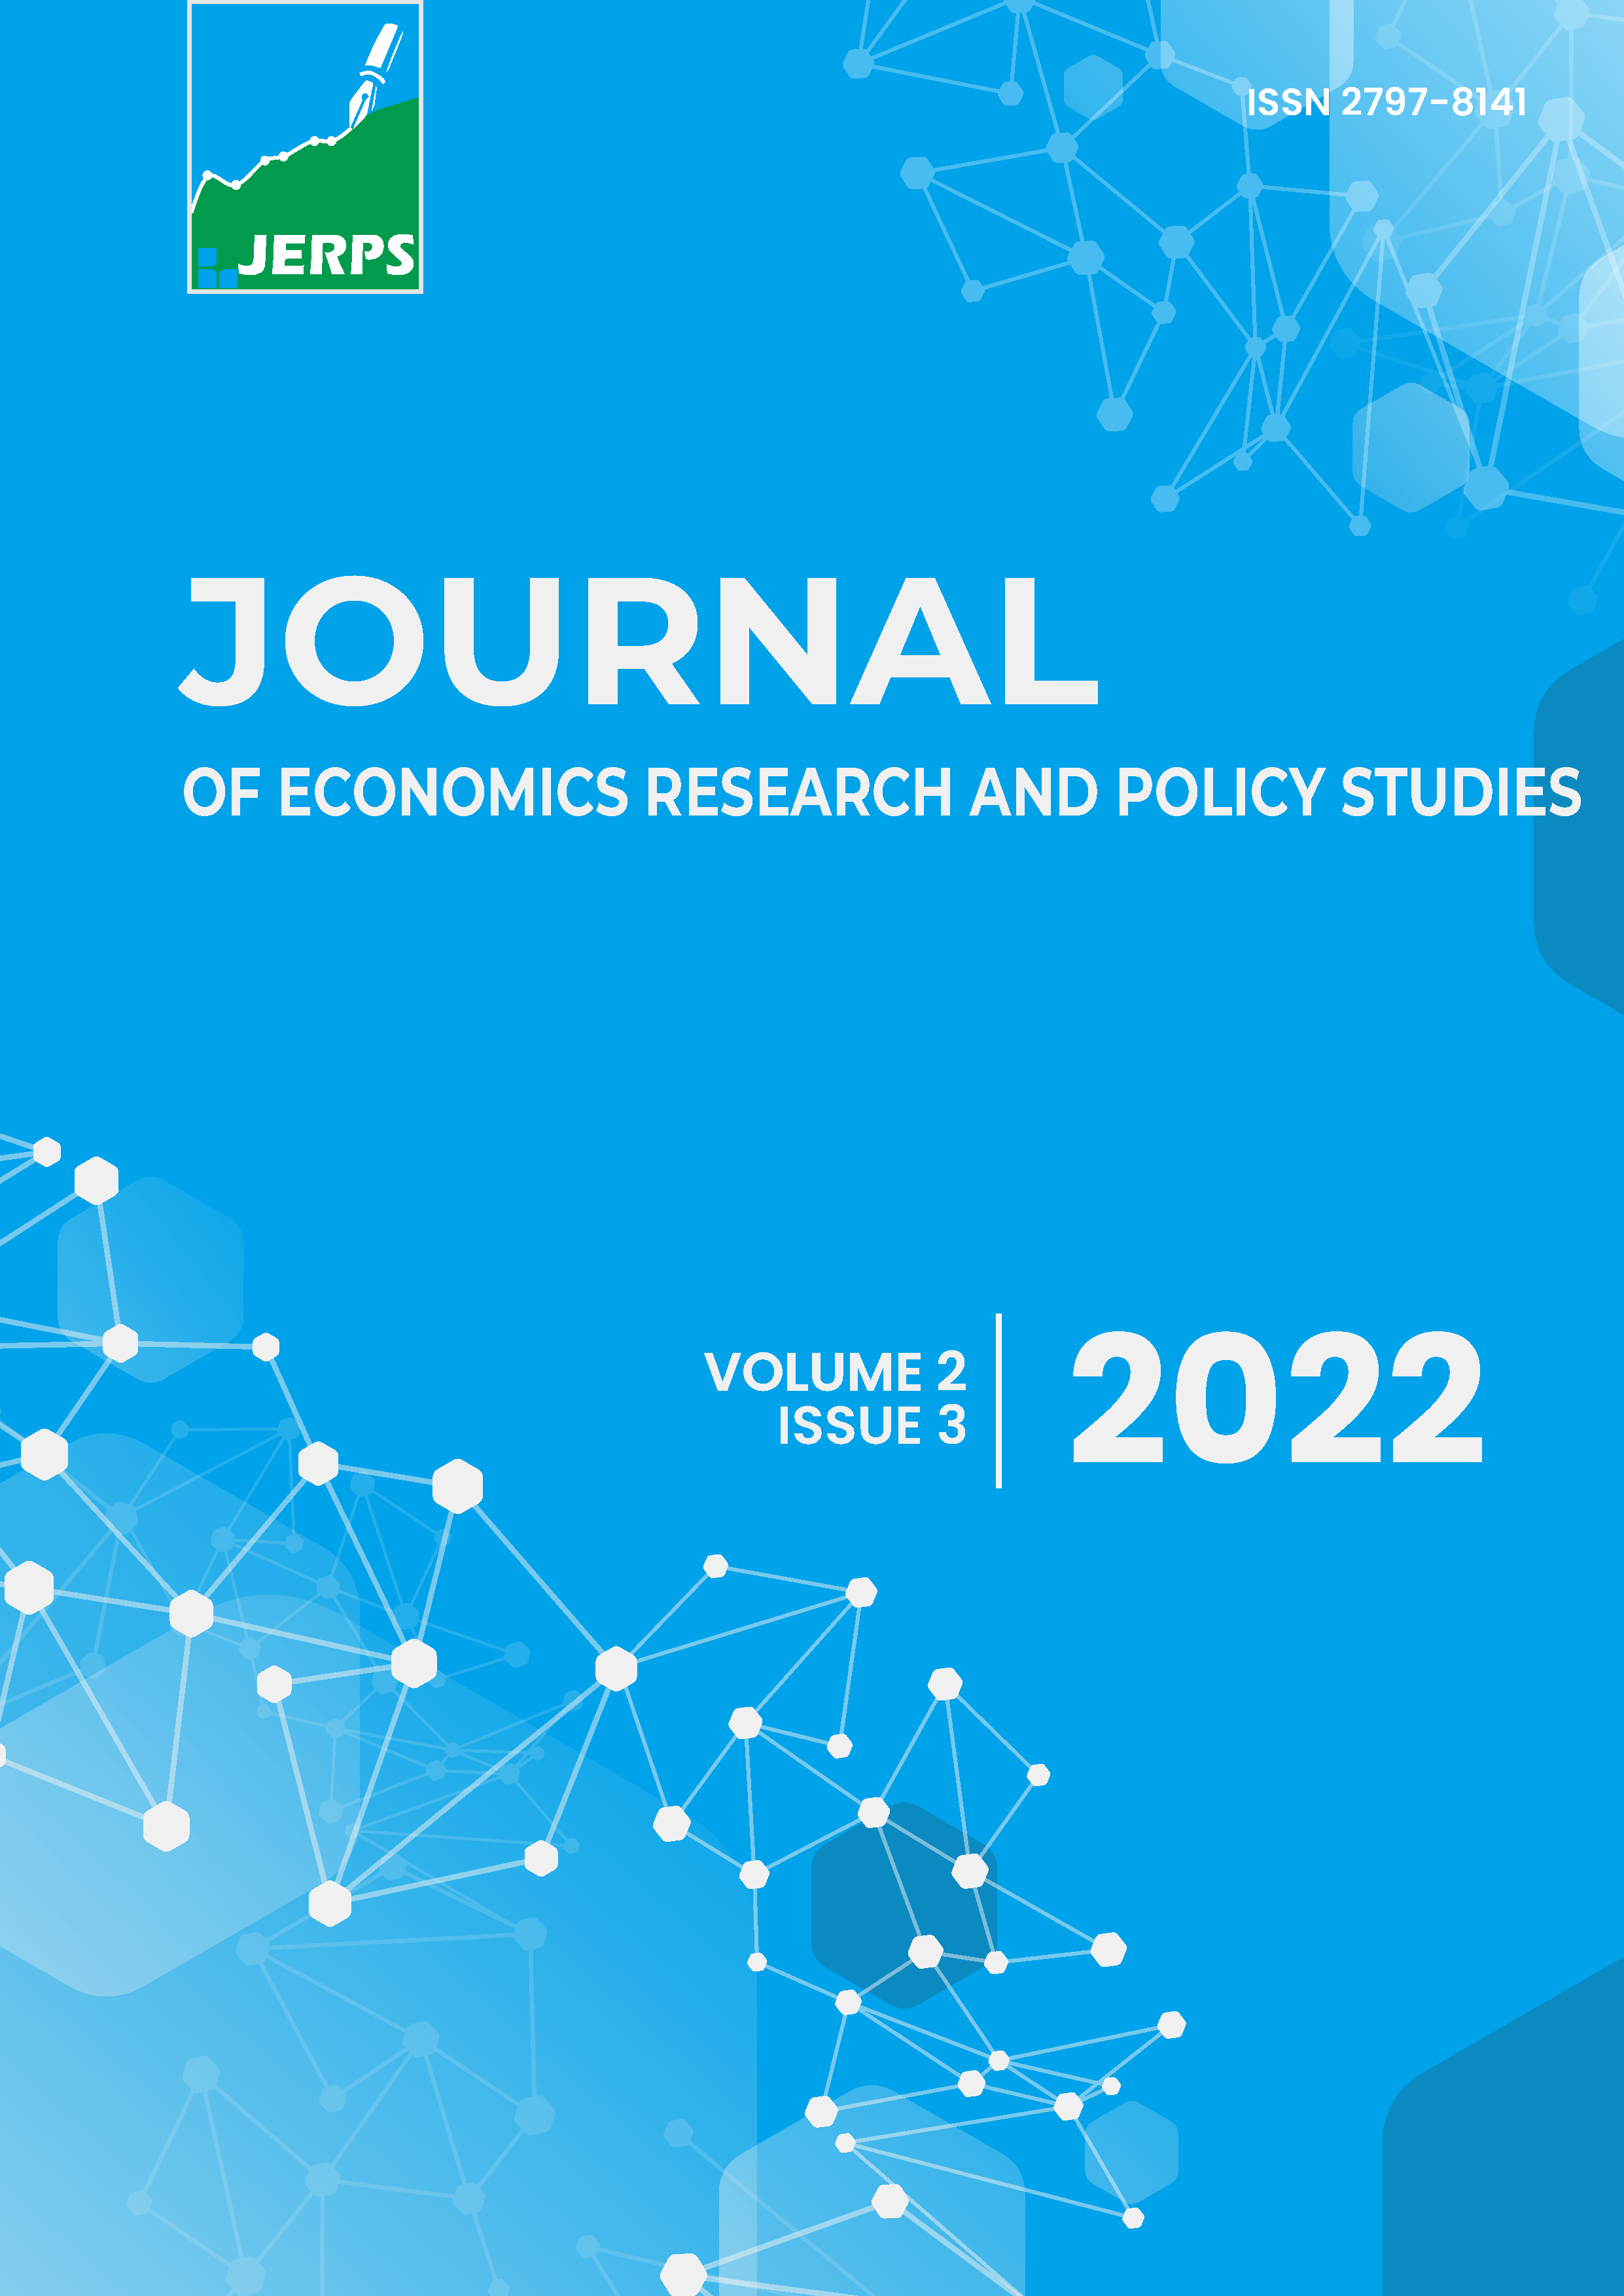 					View Vol. 2 No. 3 (2022): Journal of Economics Research and Policy Studies
				